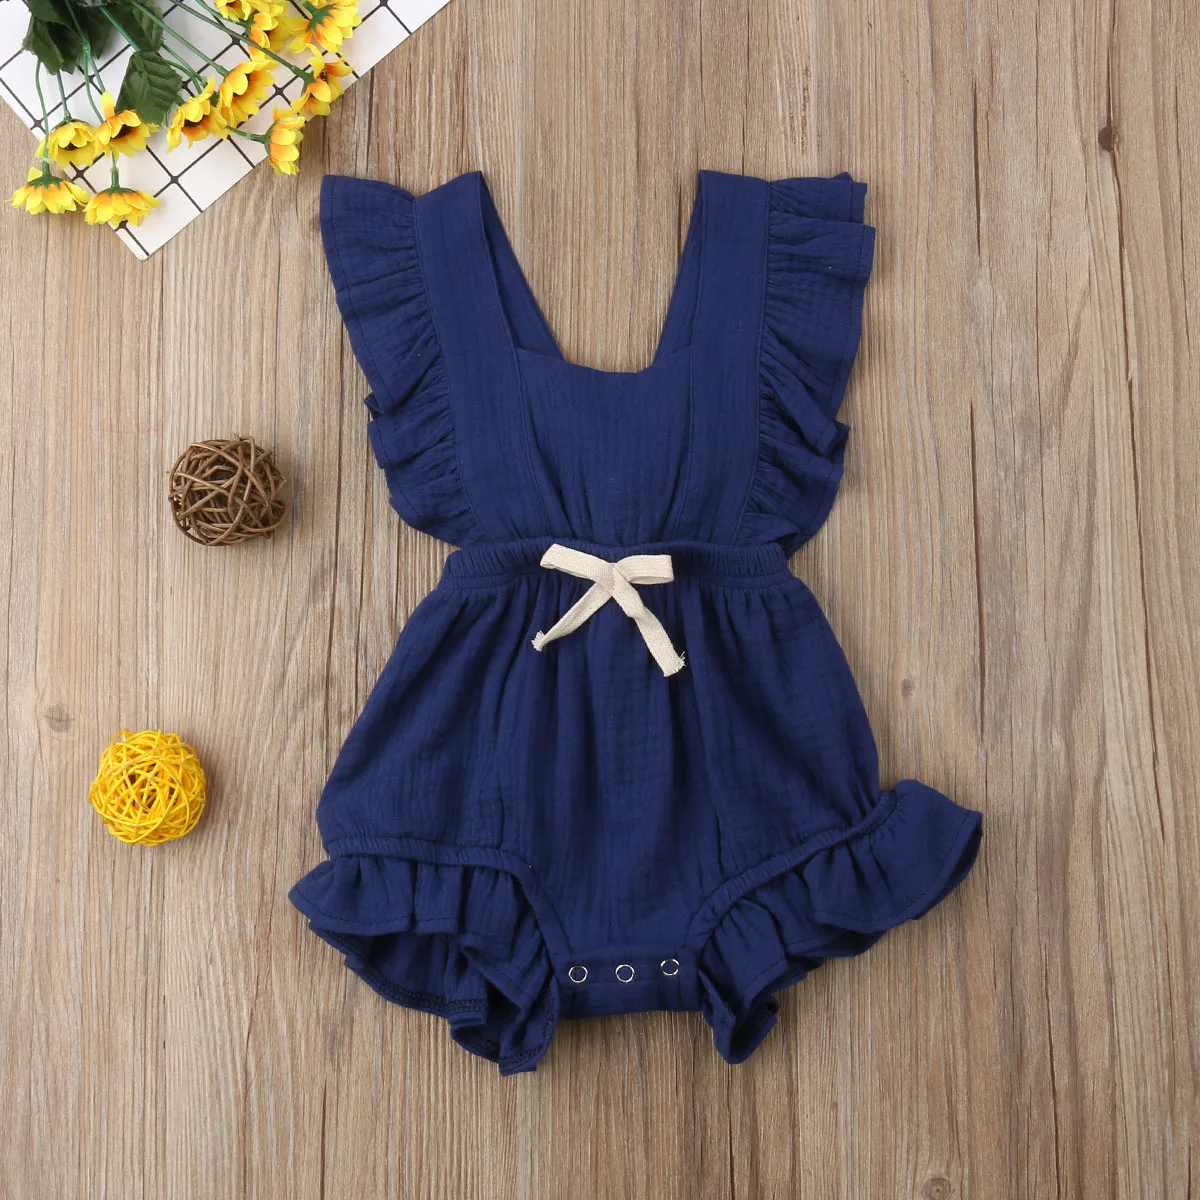 HTB1v8TLaozrK1RjSspmq6AOdFXac 2019 Brand New Infant Newborn Baby Girls Ruffle Rompers One-Pieces Clothes Baby Girl Summer Sleeveless Romper Jumpsuit Sunsuit